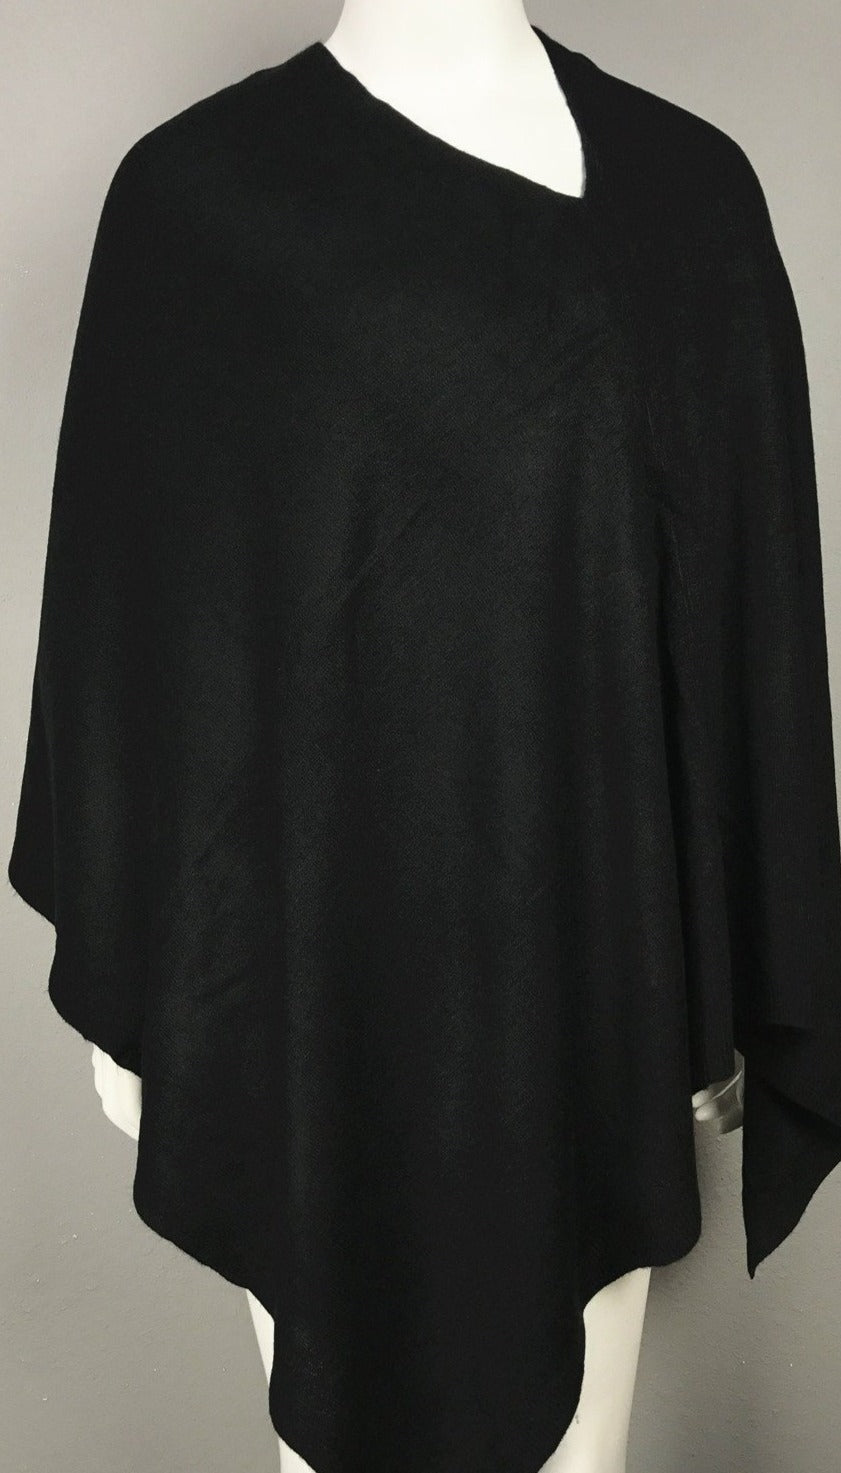 FennySun Inc. Cashmere-like Poncho - Black available at The Good Life Boutique